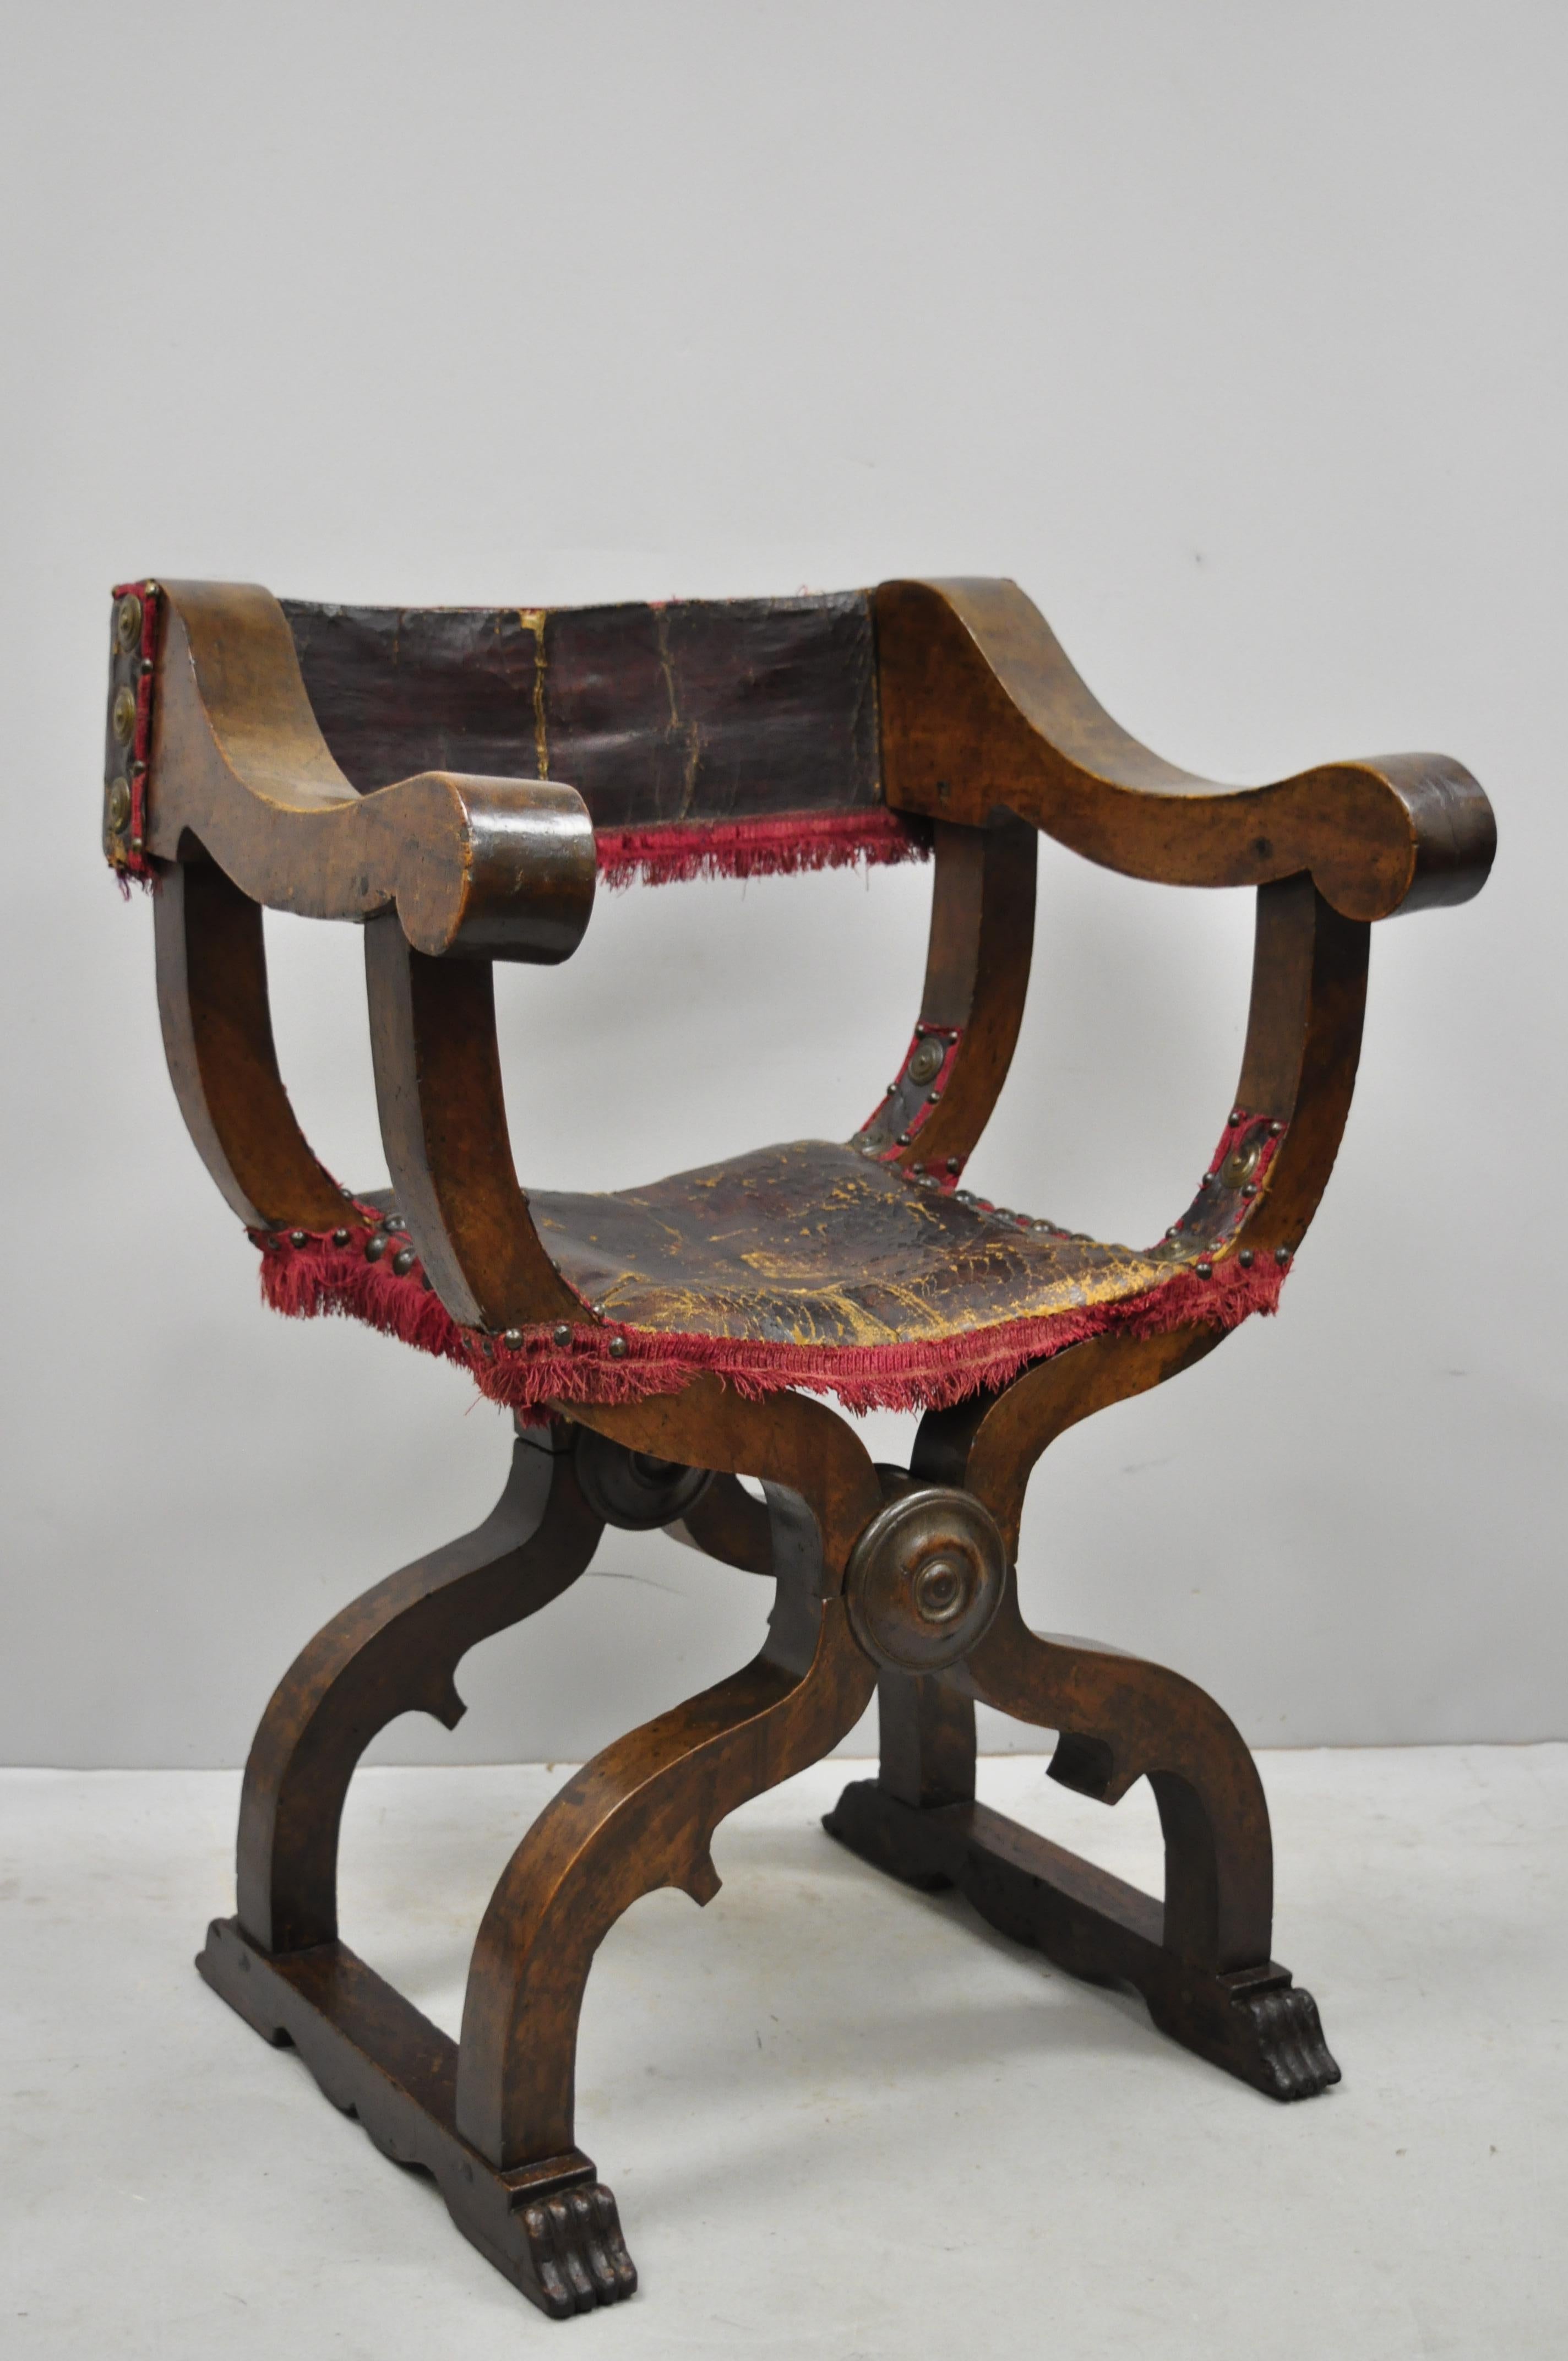 19th century Italian Renaissance Savonarola walnut and leather armchair. Item features remarkable aged patina, solid wood construction, original Sotheby's label, circa mid-19th century. Measurements: 36.5